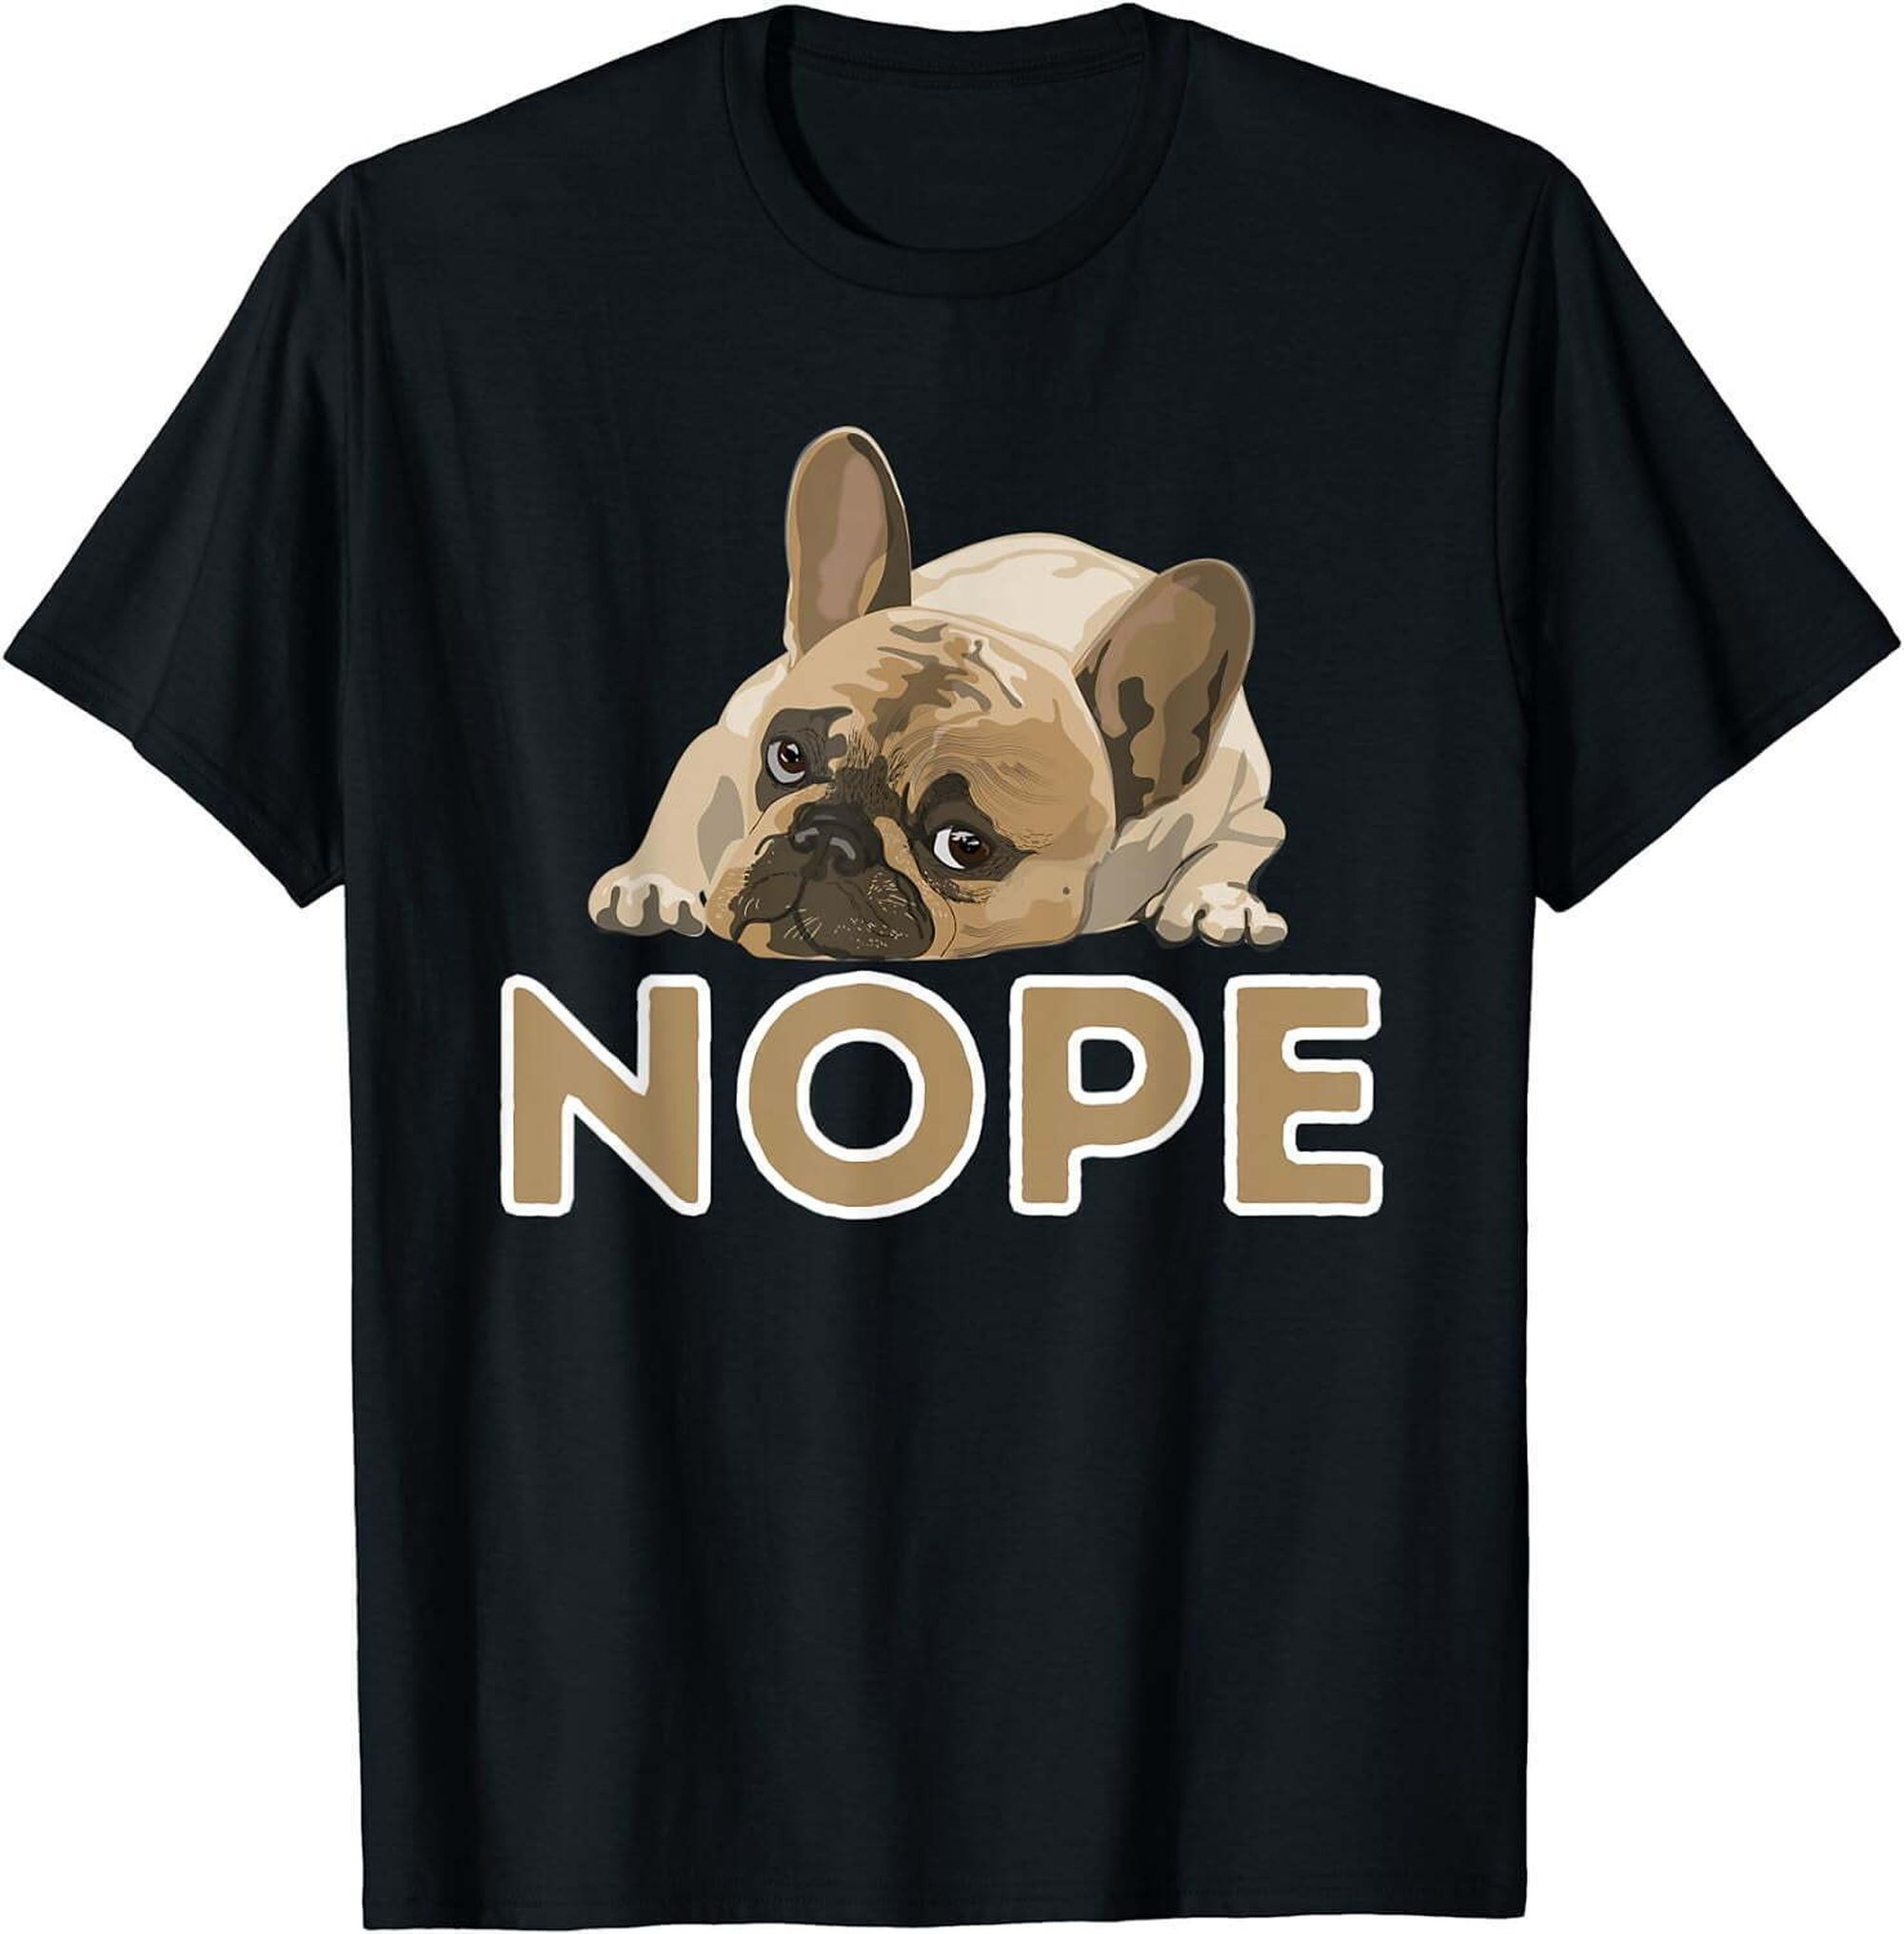 Adorable French Bulldog Nope Tee - Perfect Present for Frenchie Fans ...